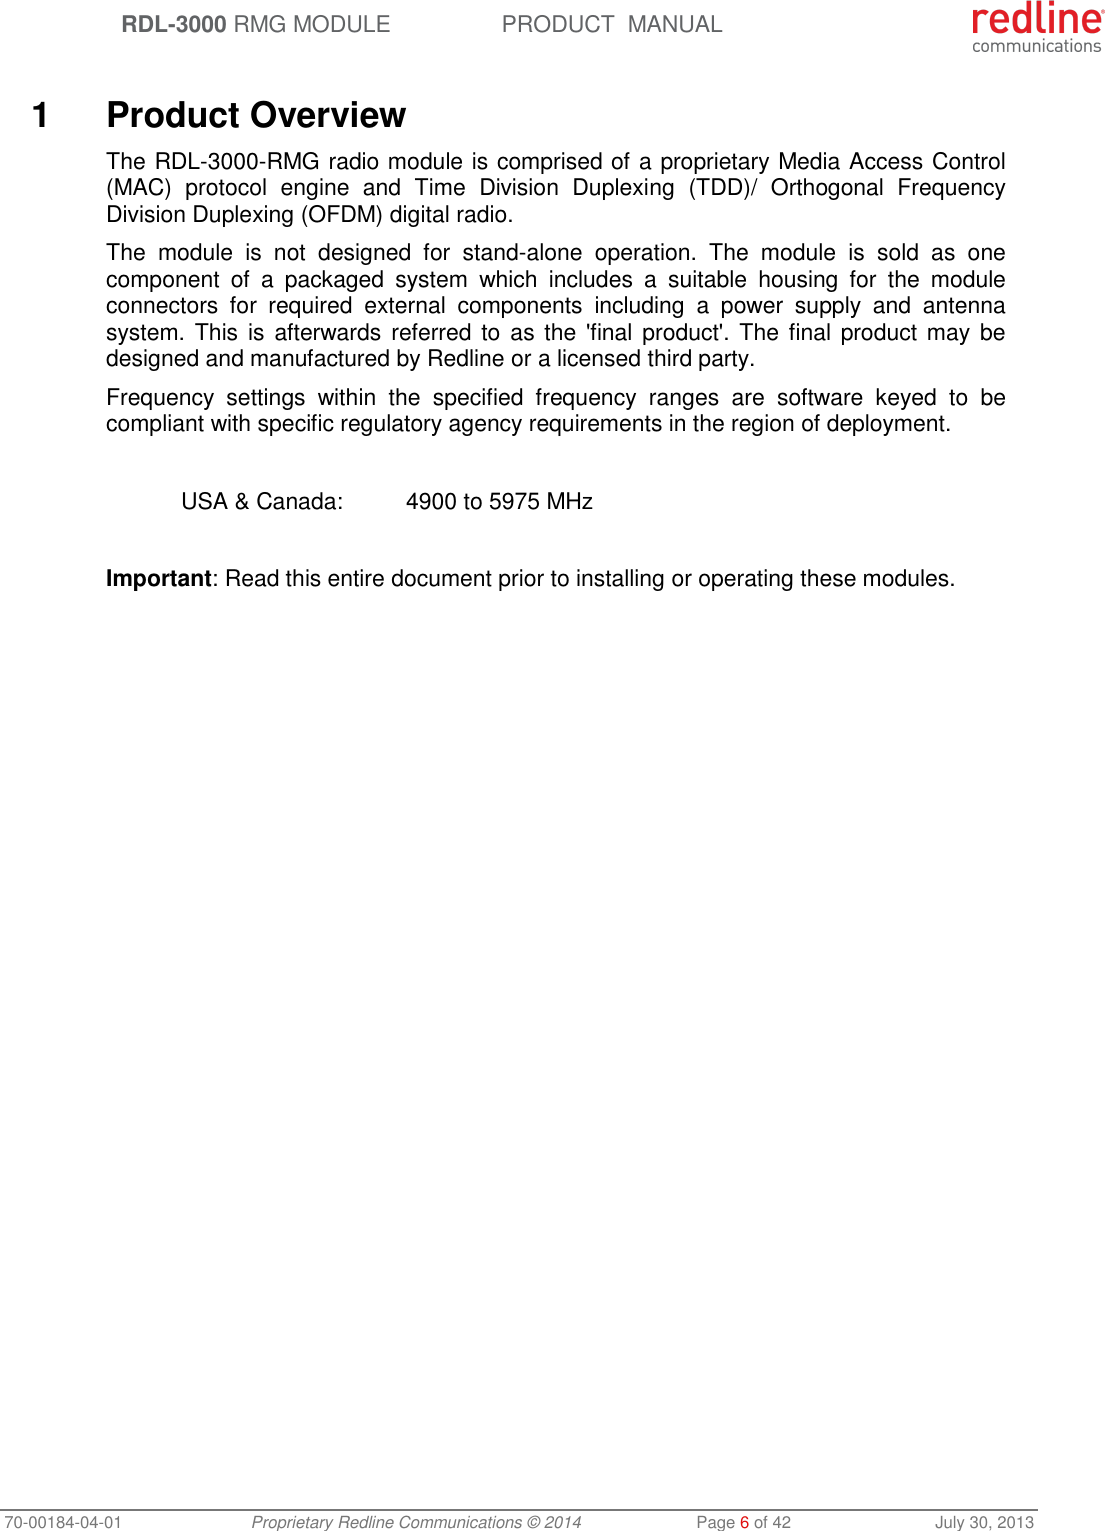  RDL-3000 RMG MODULE PRODUCT  MANUAL 70-00184-04-01 Proprietary Redline Communications © 2014  Page 6 of 42  July 30, 2013   1  Product Overview The RDL-3000-RMG radio module is comprised of a proprietary Media Access Control (MAC)  protocol  engine  and  Time  Division  Duplexing  (TDD)/  Orthogonal  Frequency Division Duplexing (OFDM) digital radio. The  module  is  not  designed  for  stand-alone  operation.  The  module  is  sold  as  one component  of  a  packaged  system  which  includes  a  suitable  housing  for  the  module connectors  for  required  external  components  including  a  power  supply  and  antenna system. This is  afterwards referred to  as the  &apos;final  product&apos;. The  final product may  be designed and manufactured by Redline or a licensed third party. Frequency  settings  within  the  specified  frequency  ranges  are  software  keyed  to  be compliant with specific regulatory agency requirements in the region of deployment.    USA &amp; Canada:  4900 to 5975 MHz  Important: Read this entire document prior to installing or operating these modules.  